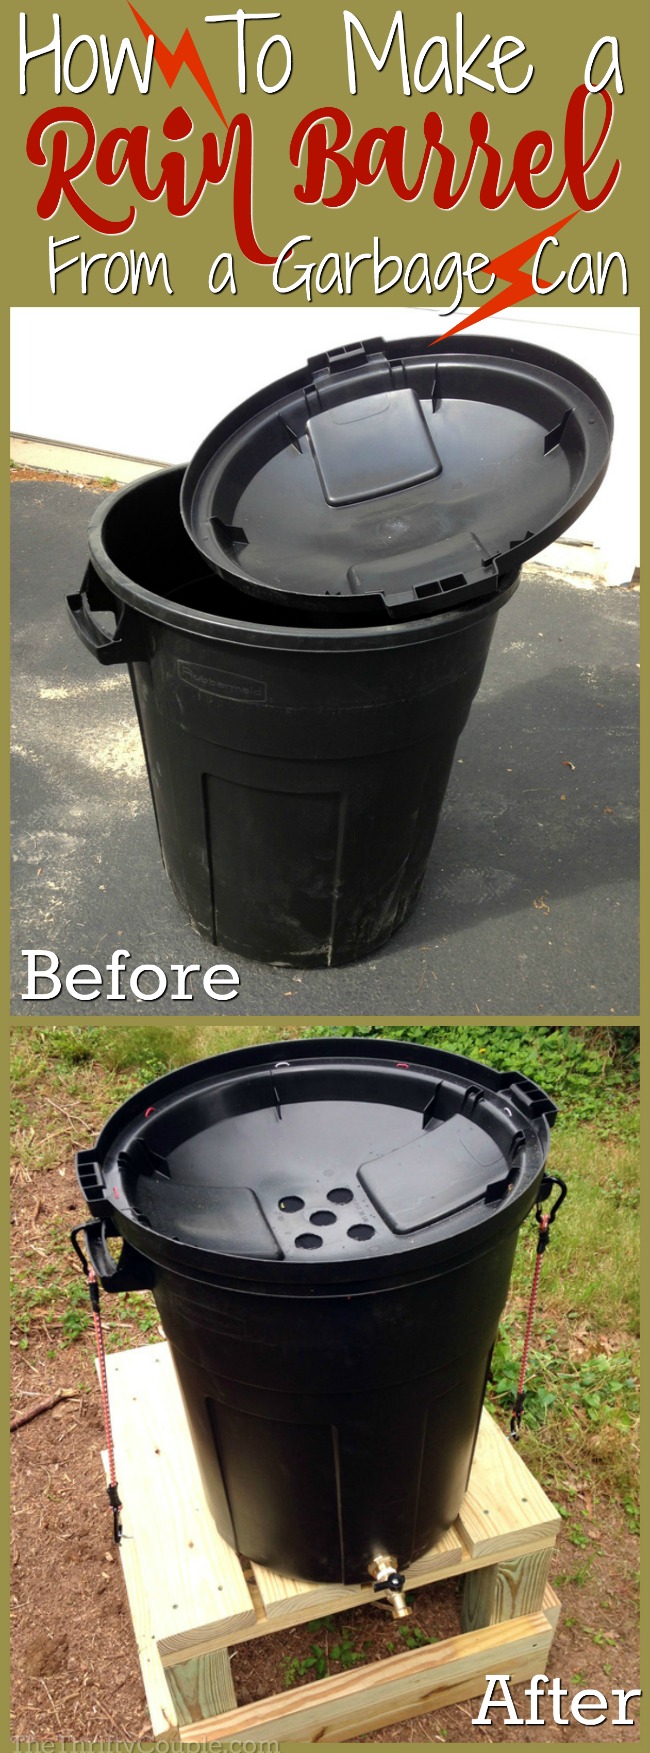 how-to-make-rain-barrel-from-garbage-can-before-after